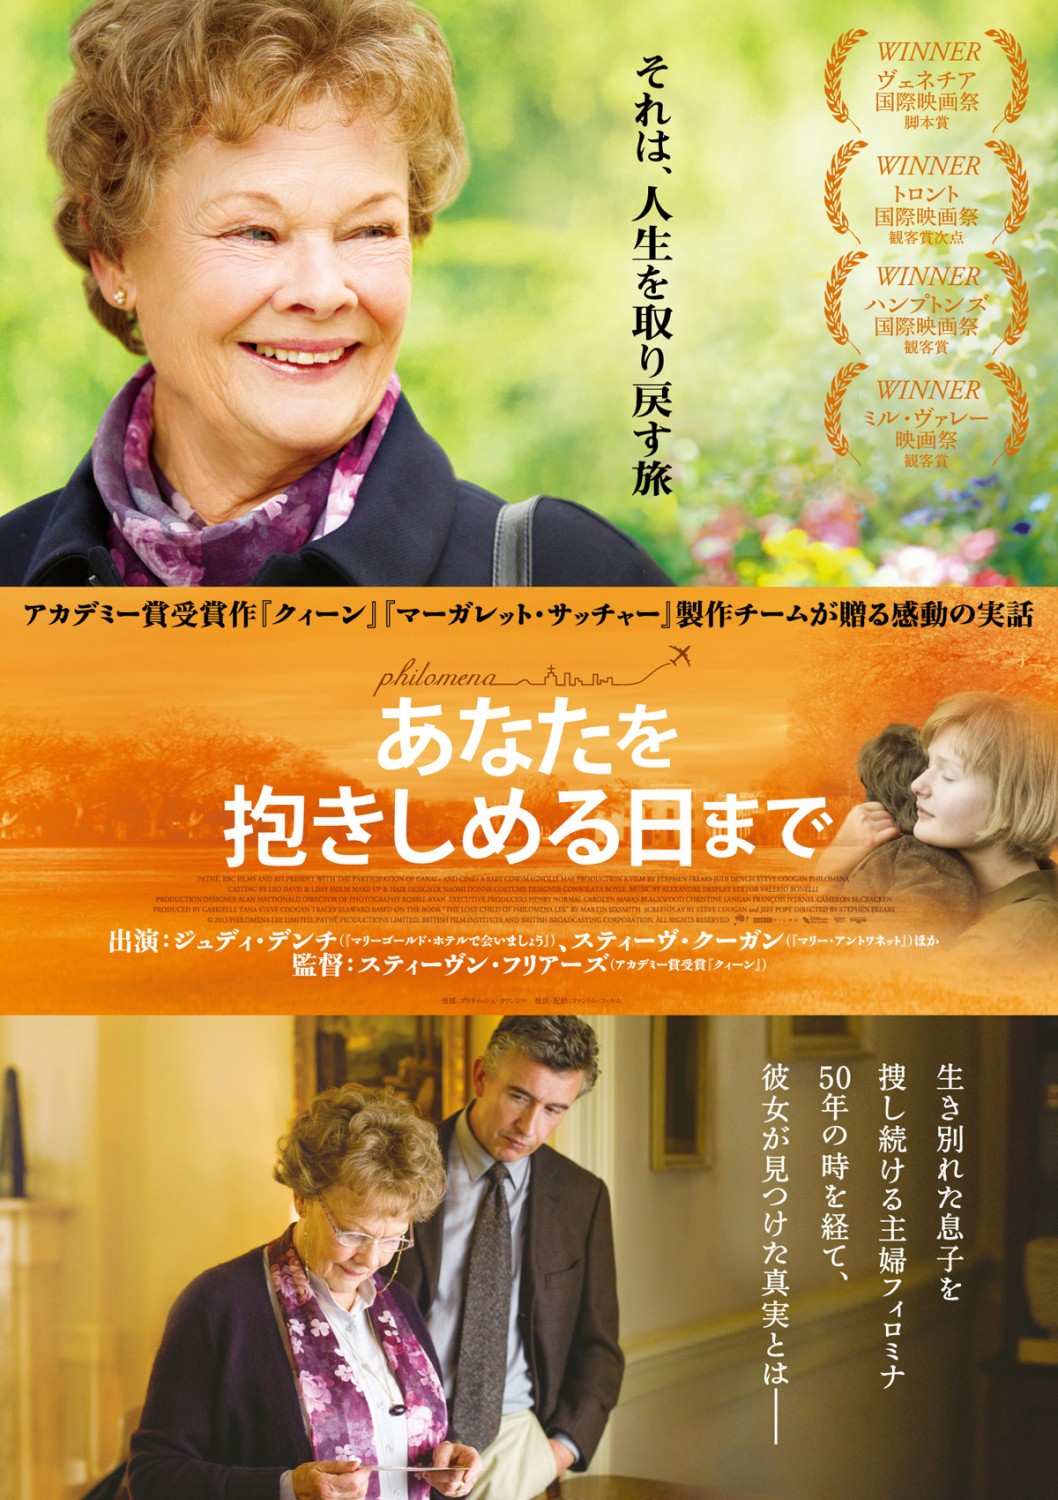 Extra Large Movie Poster Image for Philomena (#4 of 7)